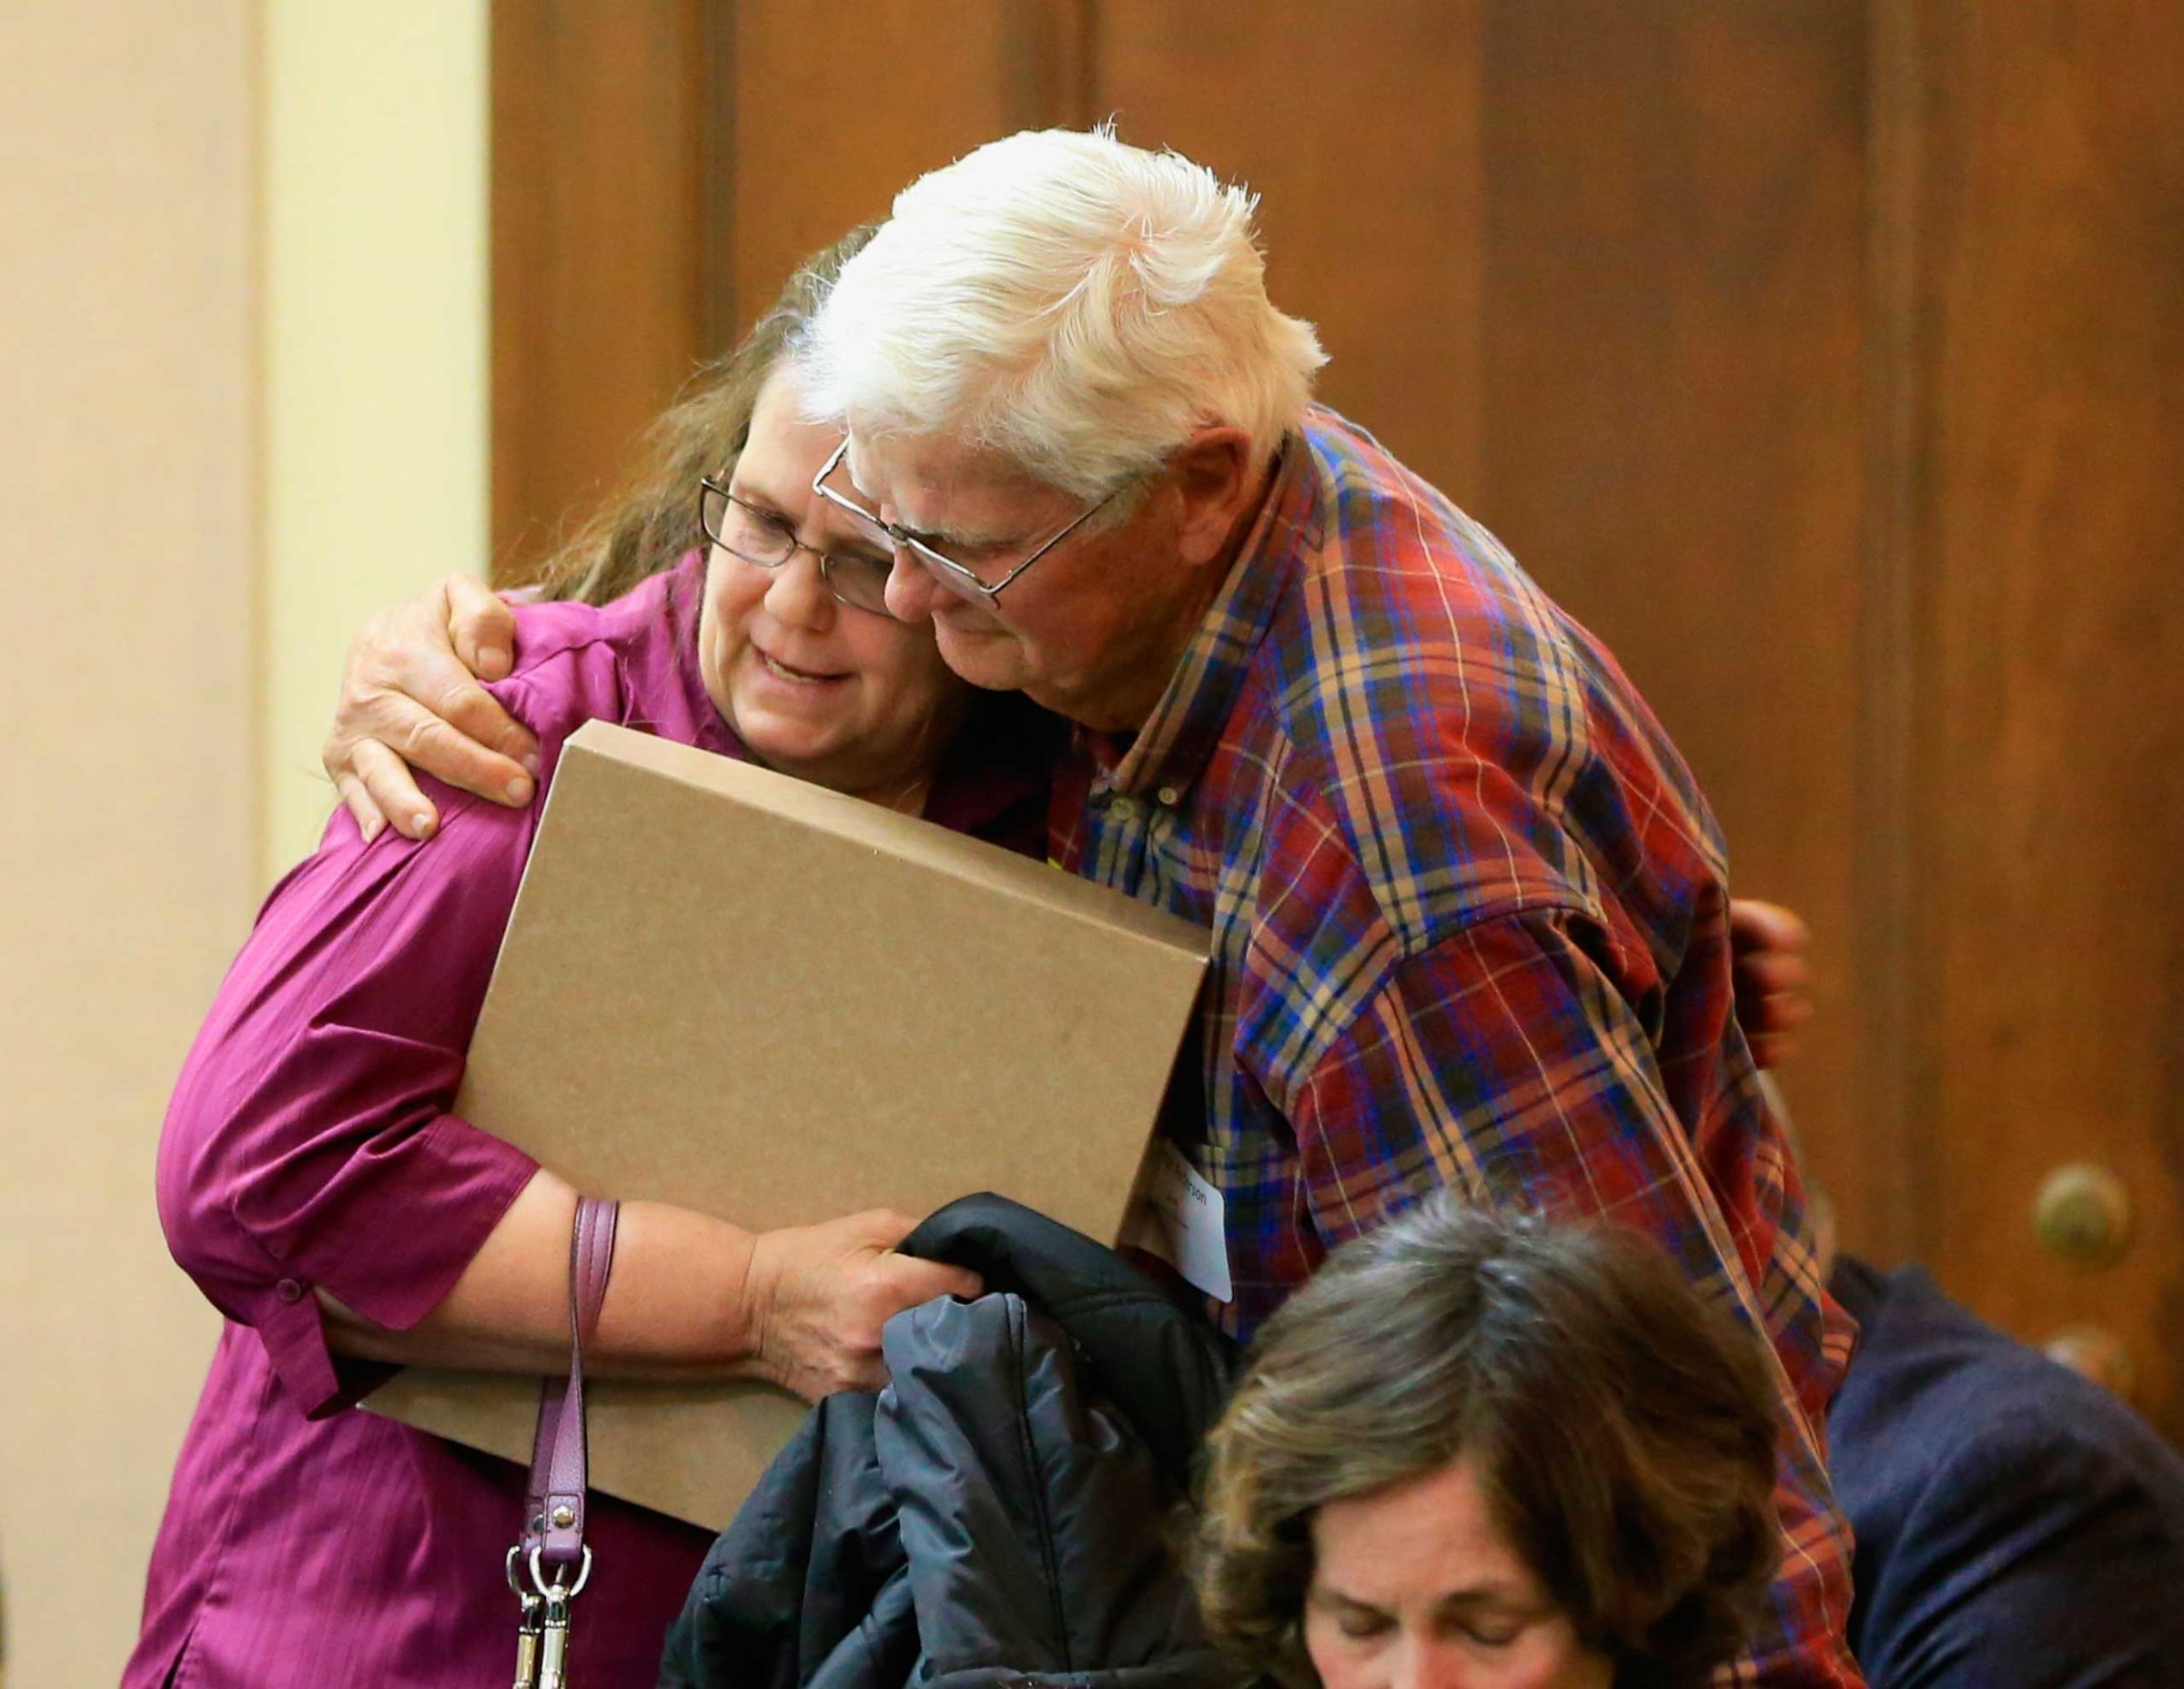 Miriam Thimm Kelle, left, whose brother James Thimm was tortured and killed on a southeast Nebraska farm in 1985, is hugged by Byron Peterson of Scottsbluff, after she testified in favor of a law proposal to change the death penalty to life imprisonment without parole, during a hearing before the Judiciary Committee in Lincoln, Neb., March 4, 2015.